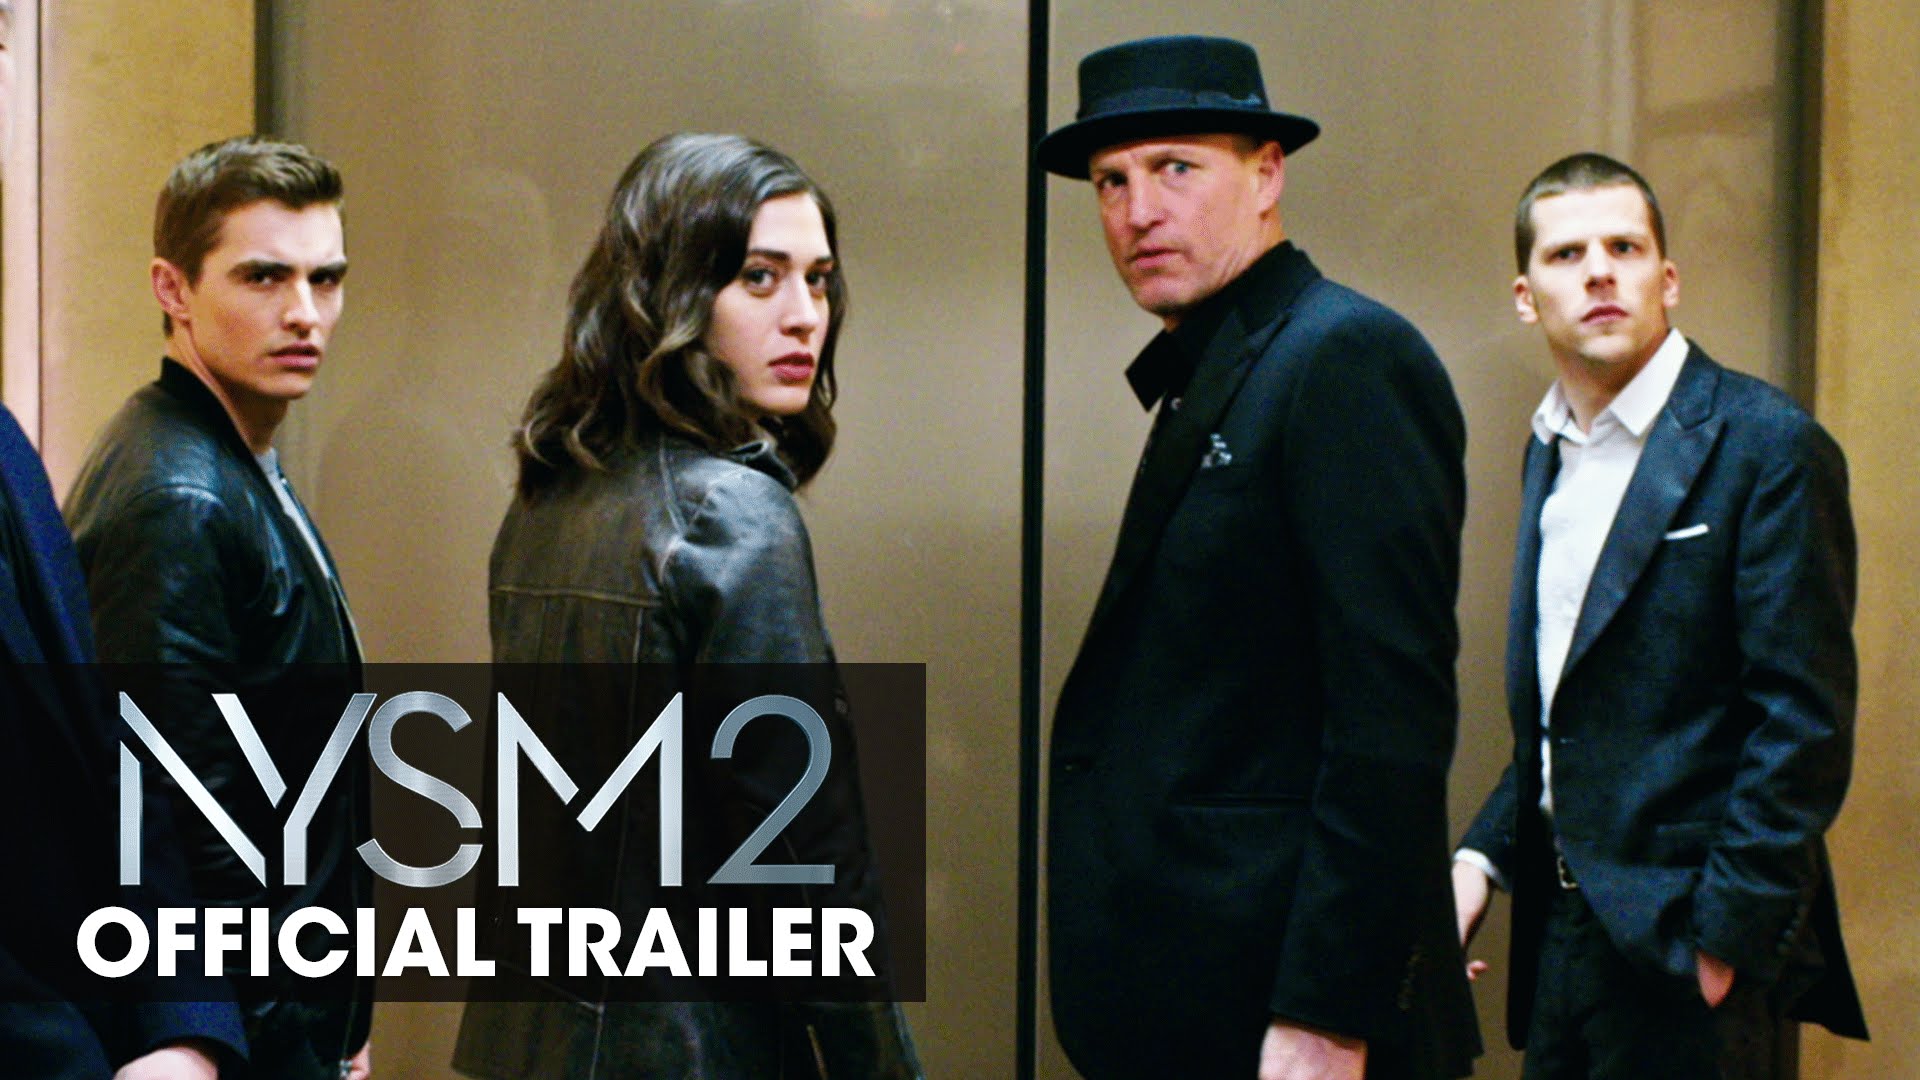 Amazing Now You See Me 2 Pictures & Backgrounds